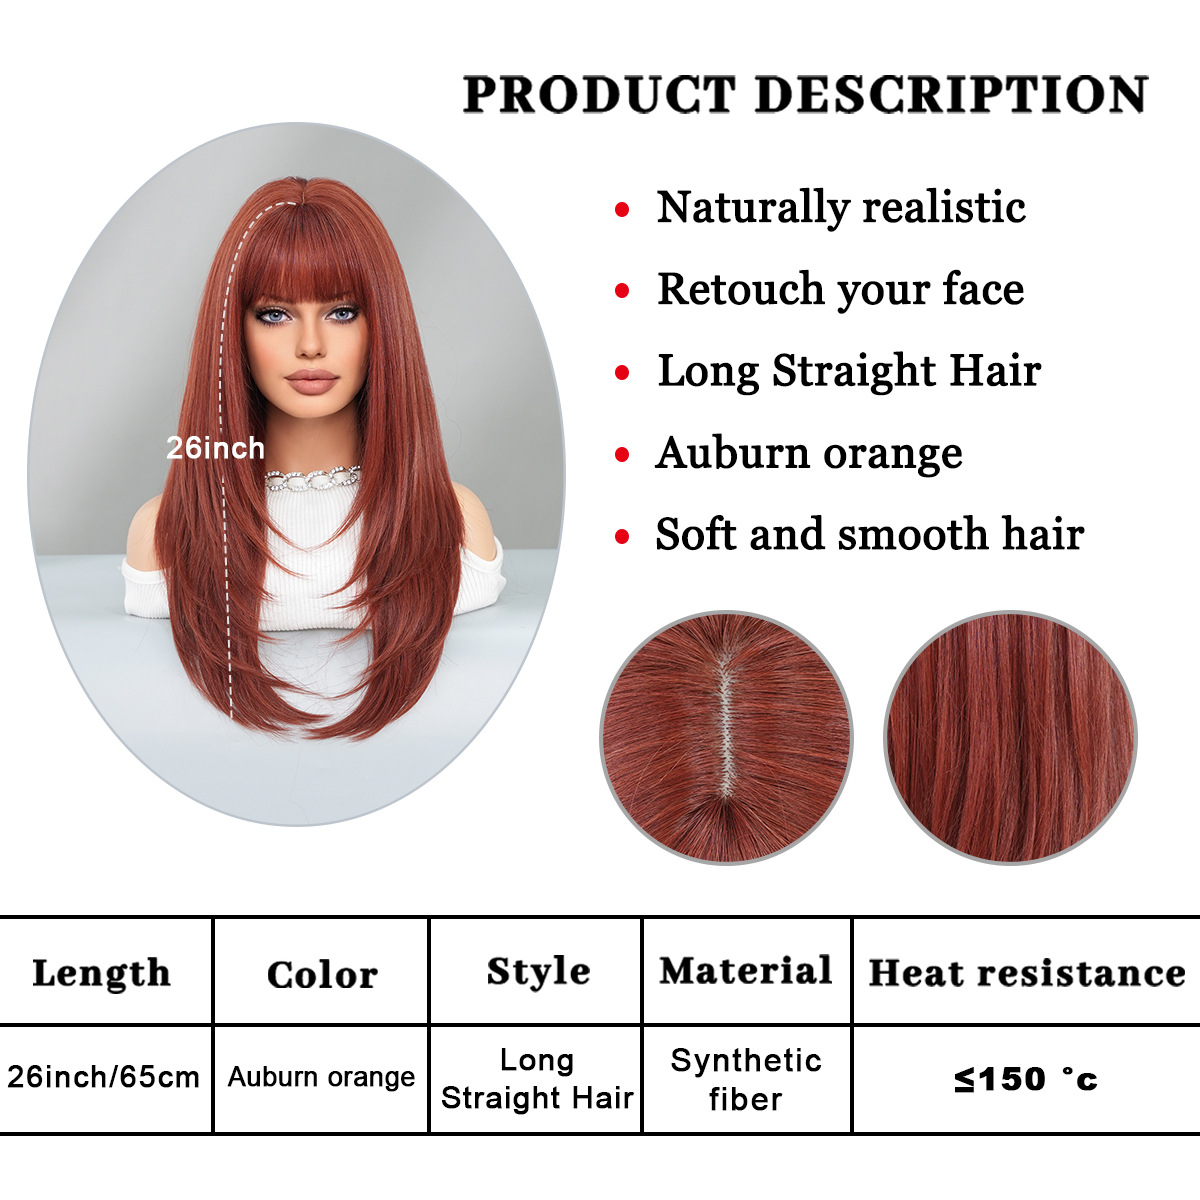 Image of a fashionable synthetic wig featuring vibrant wine red curls, styled and ready to wear